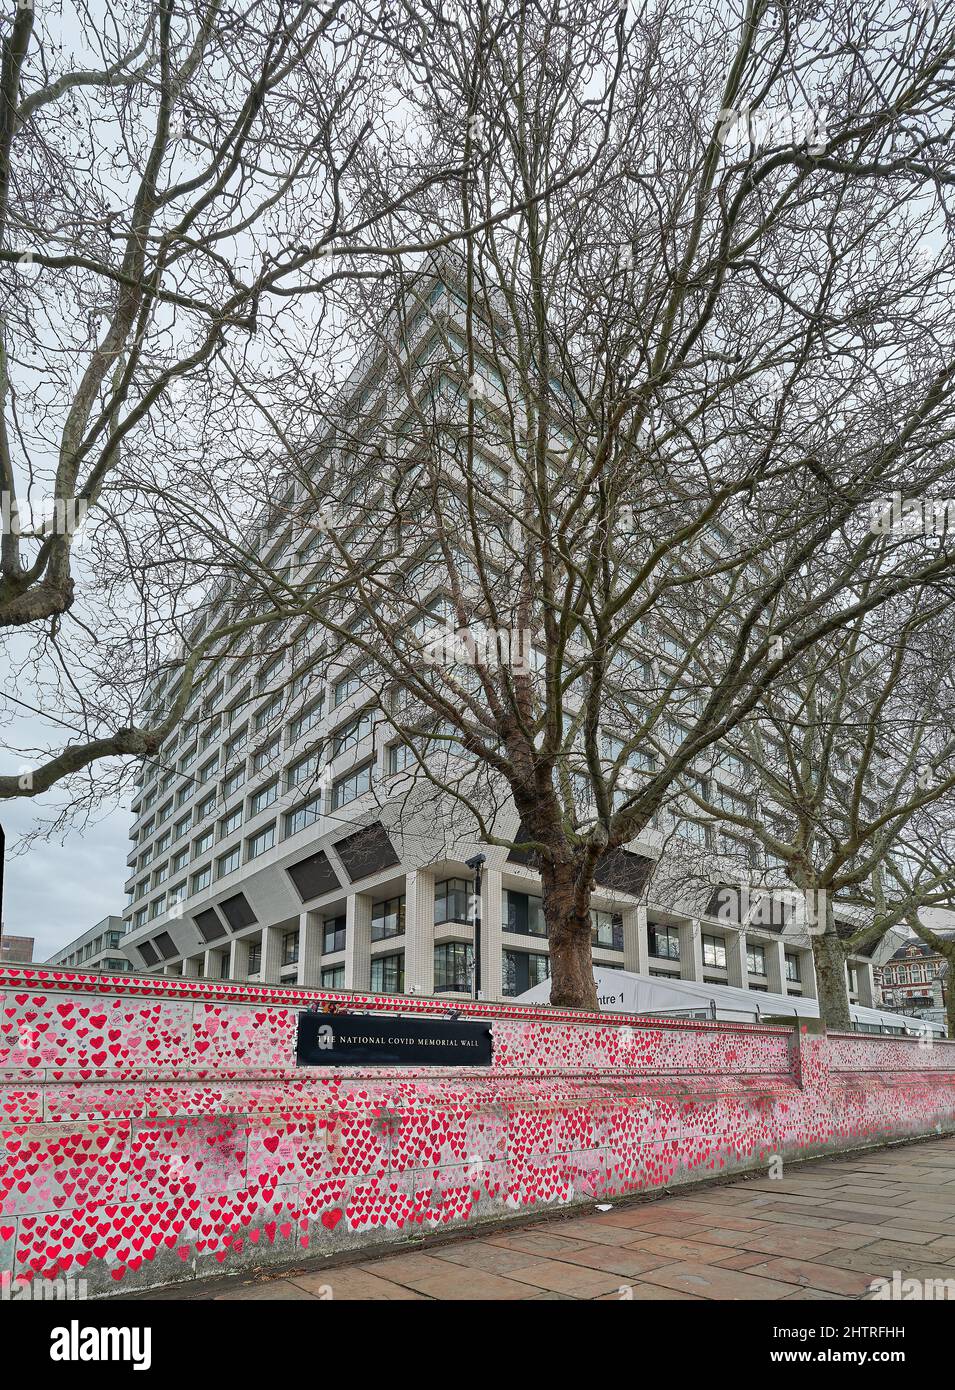 The National Covid memorial wall outside St Thomas' NHS hospital, on the bank of the river Thames, London, England. Stock Photo